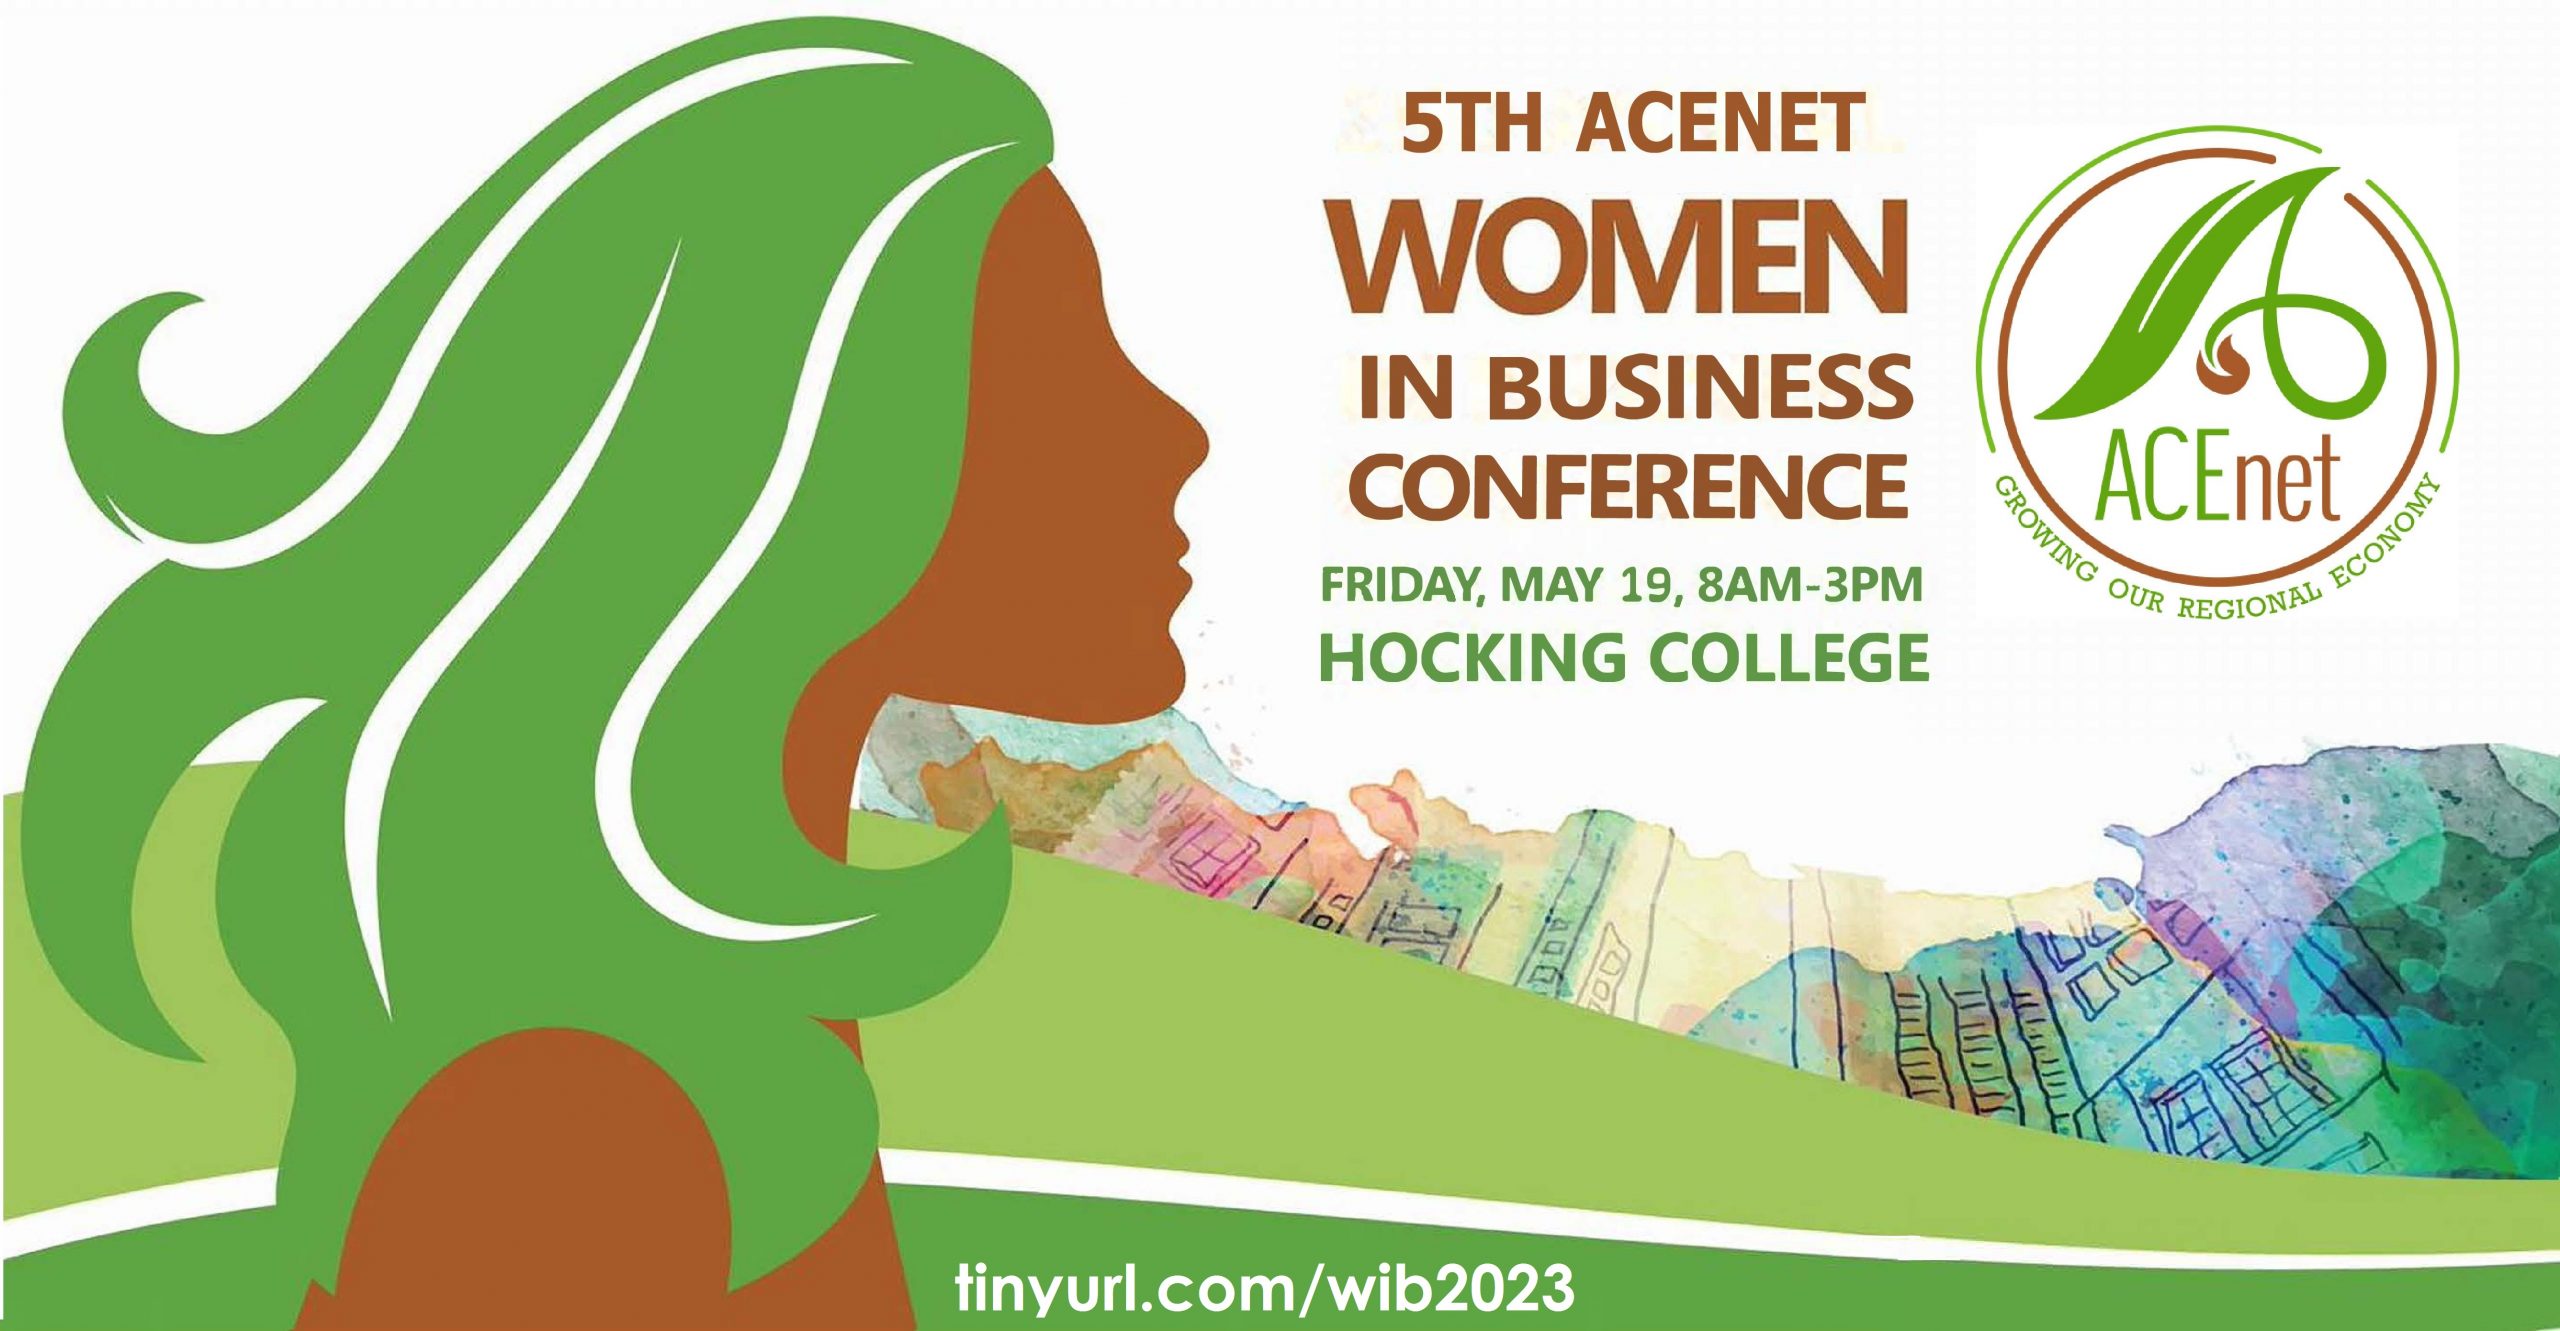 An image with the logo for the Women in Business conference.